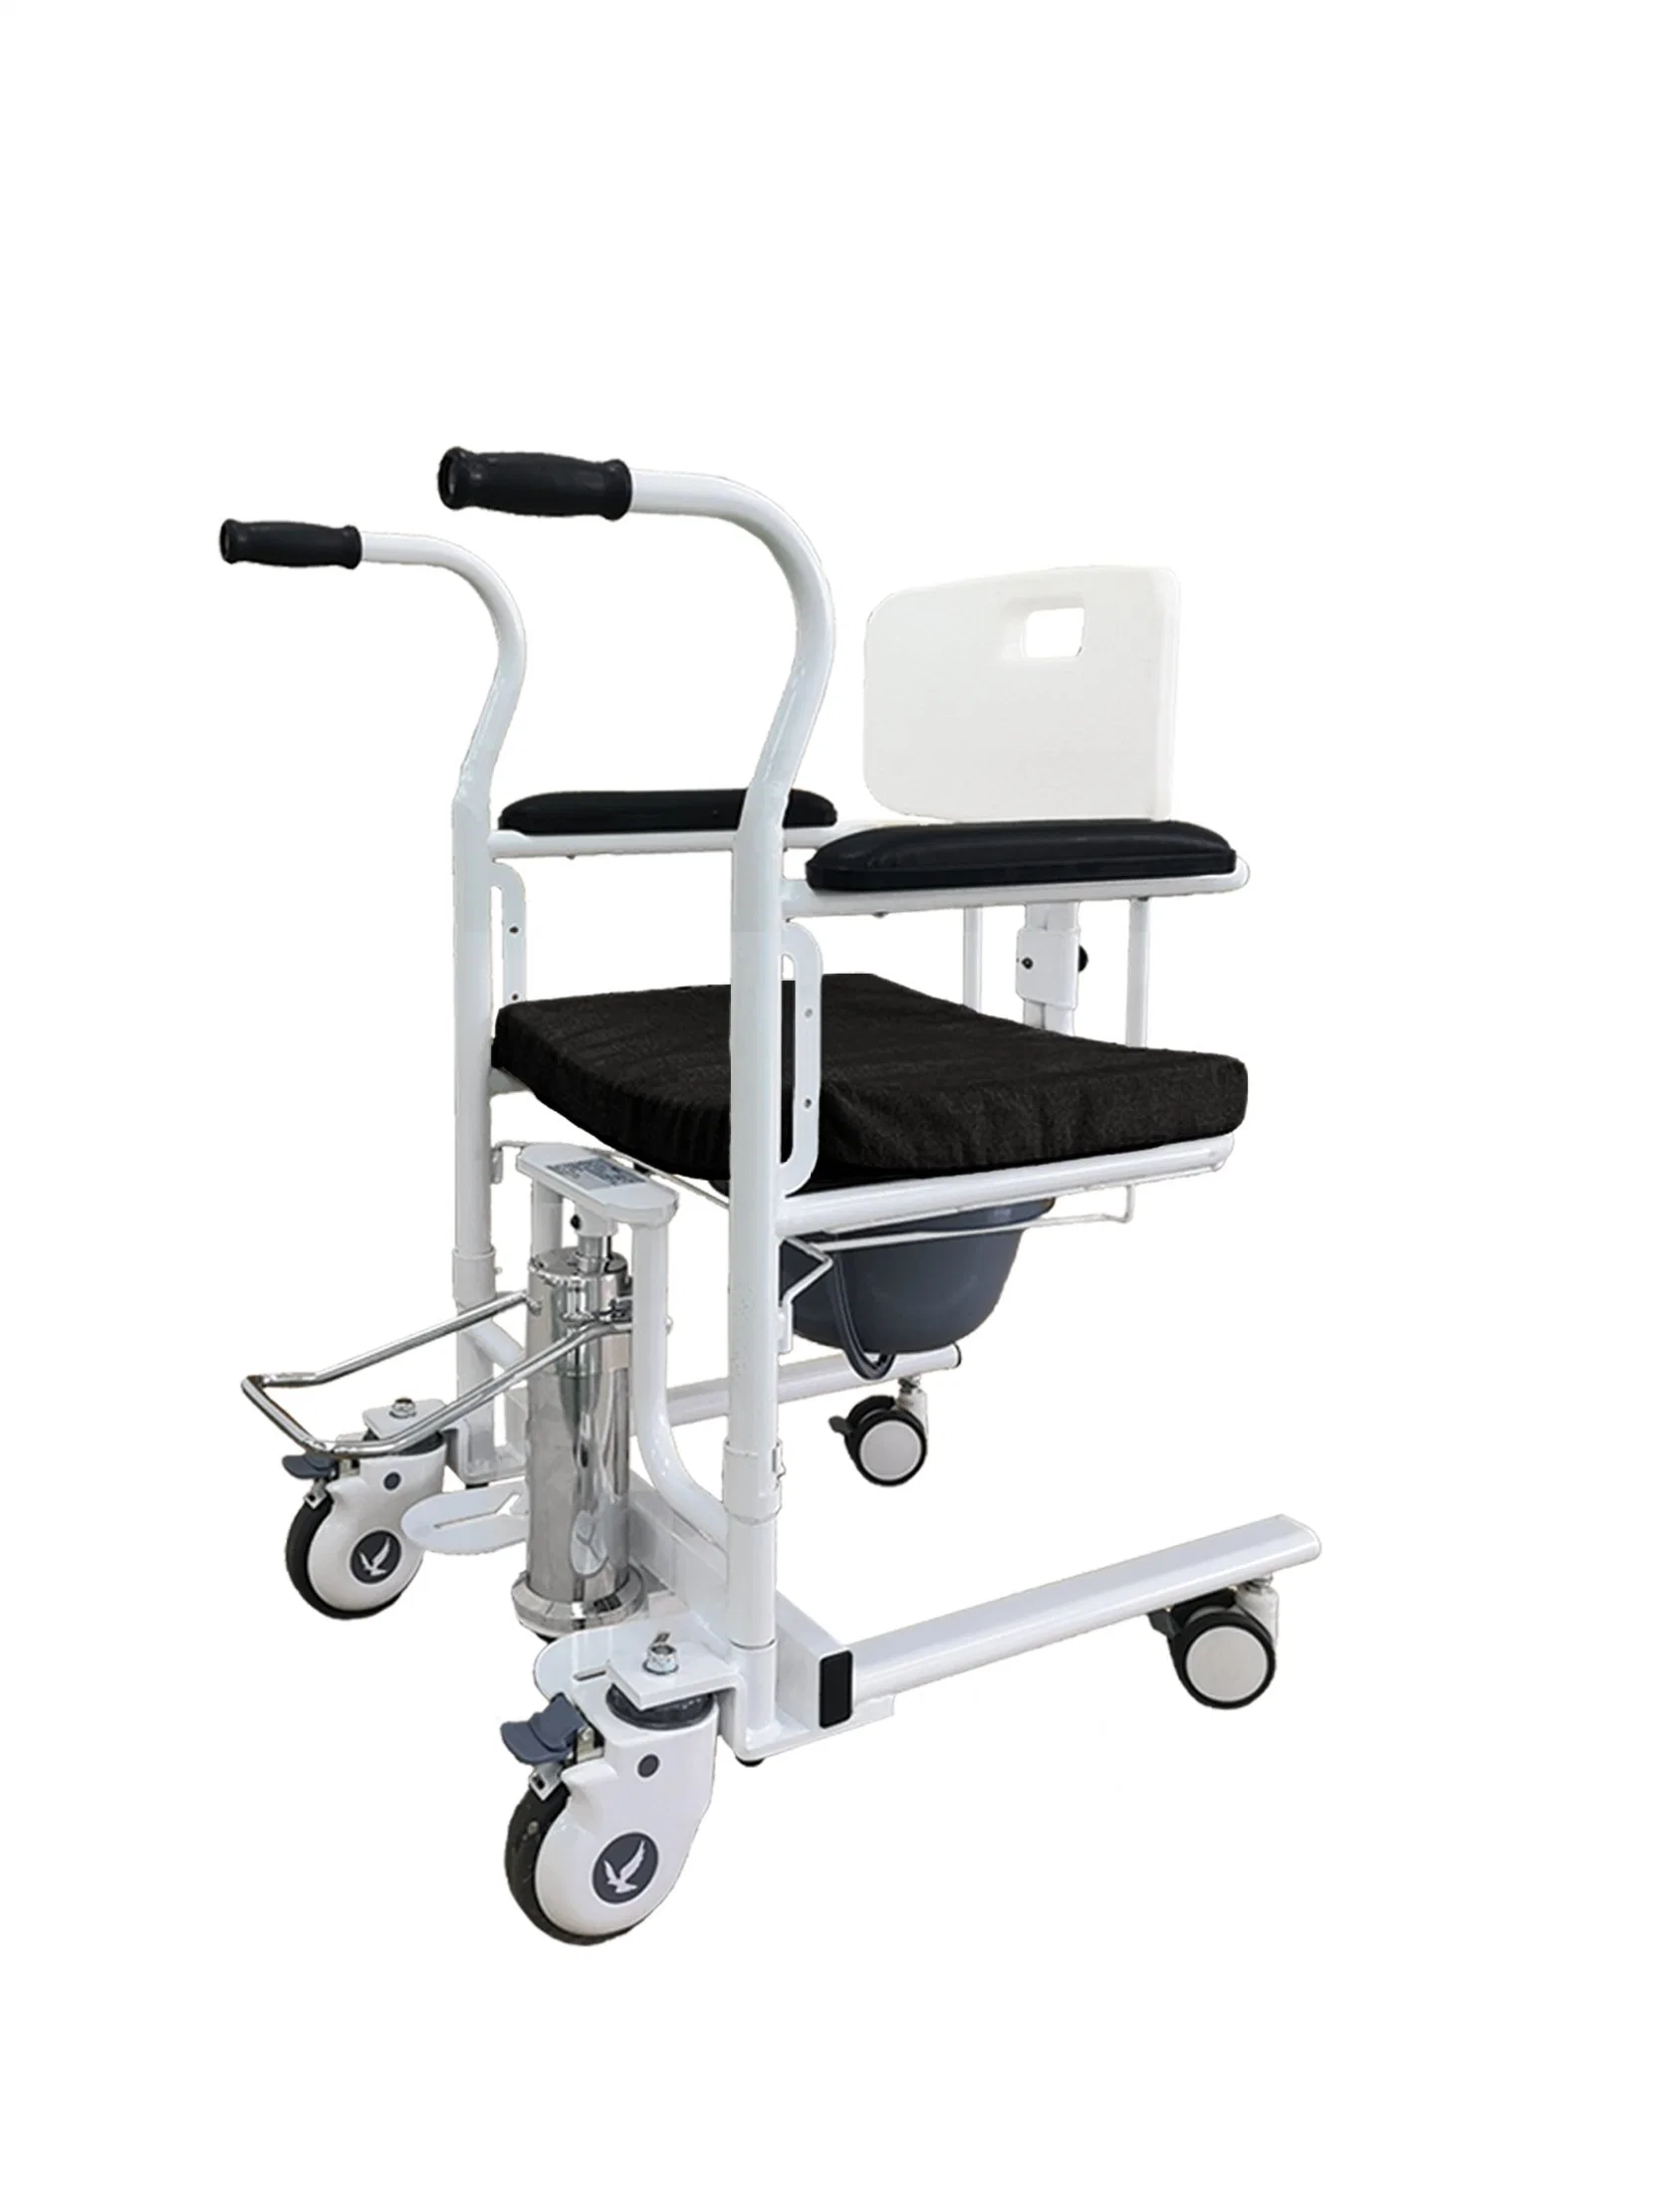 Medical Patient Lift Manual Health Care Shower Care Toilet Chair Disabled Elderly